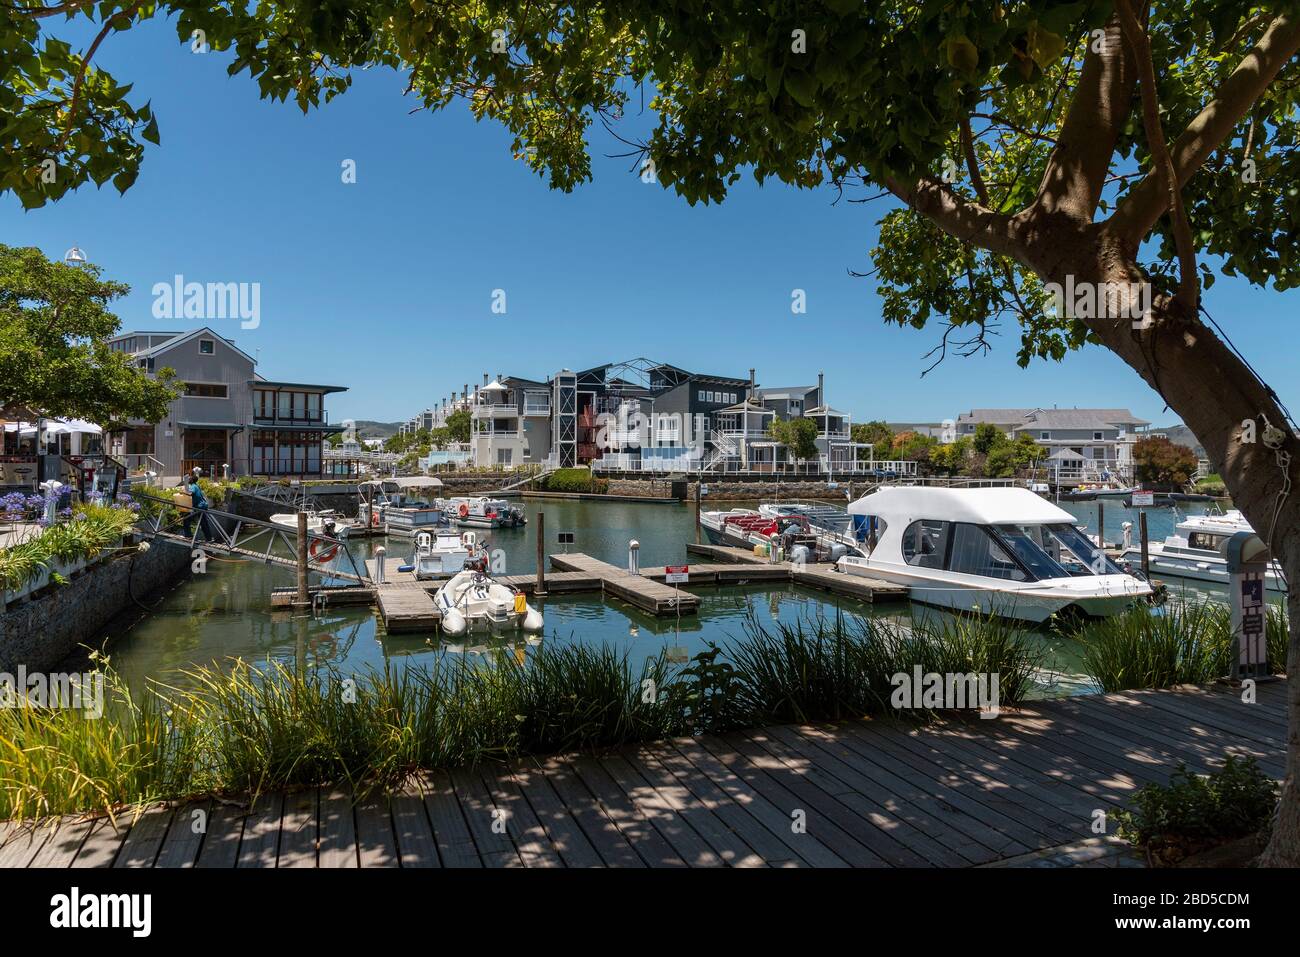 Thesen's Island, Knysna, Western Cape, South Africa. 2019.  Leisure boats on the Knysna River on Thesens's Island a holiday resort on the Garden Route. Stock Photo